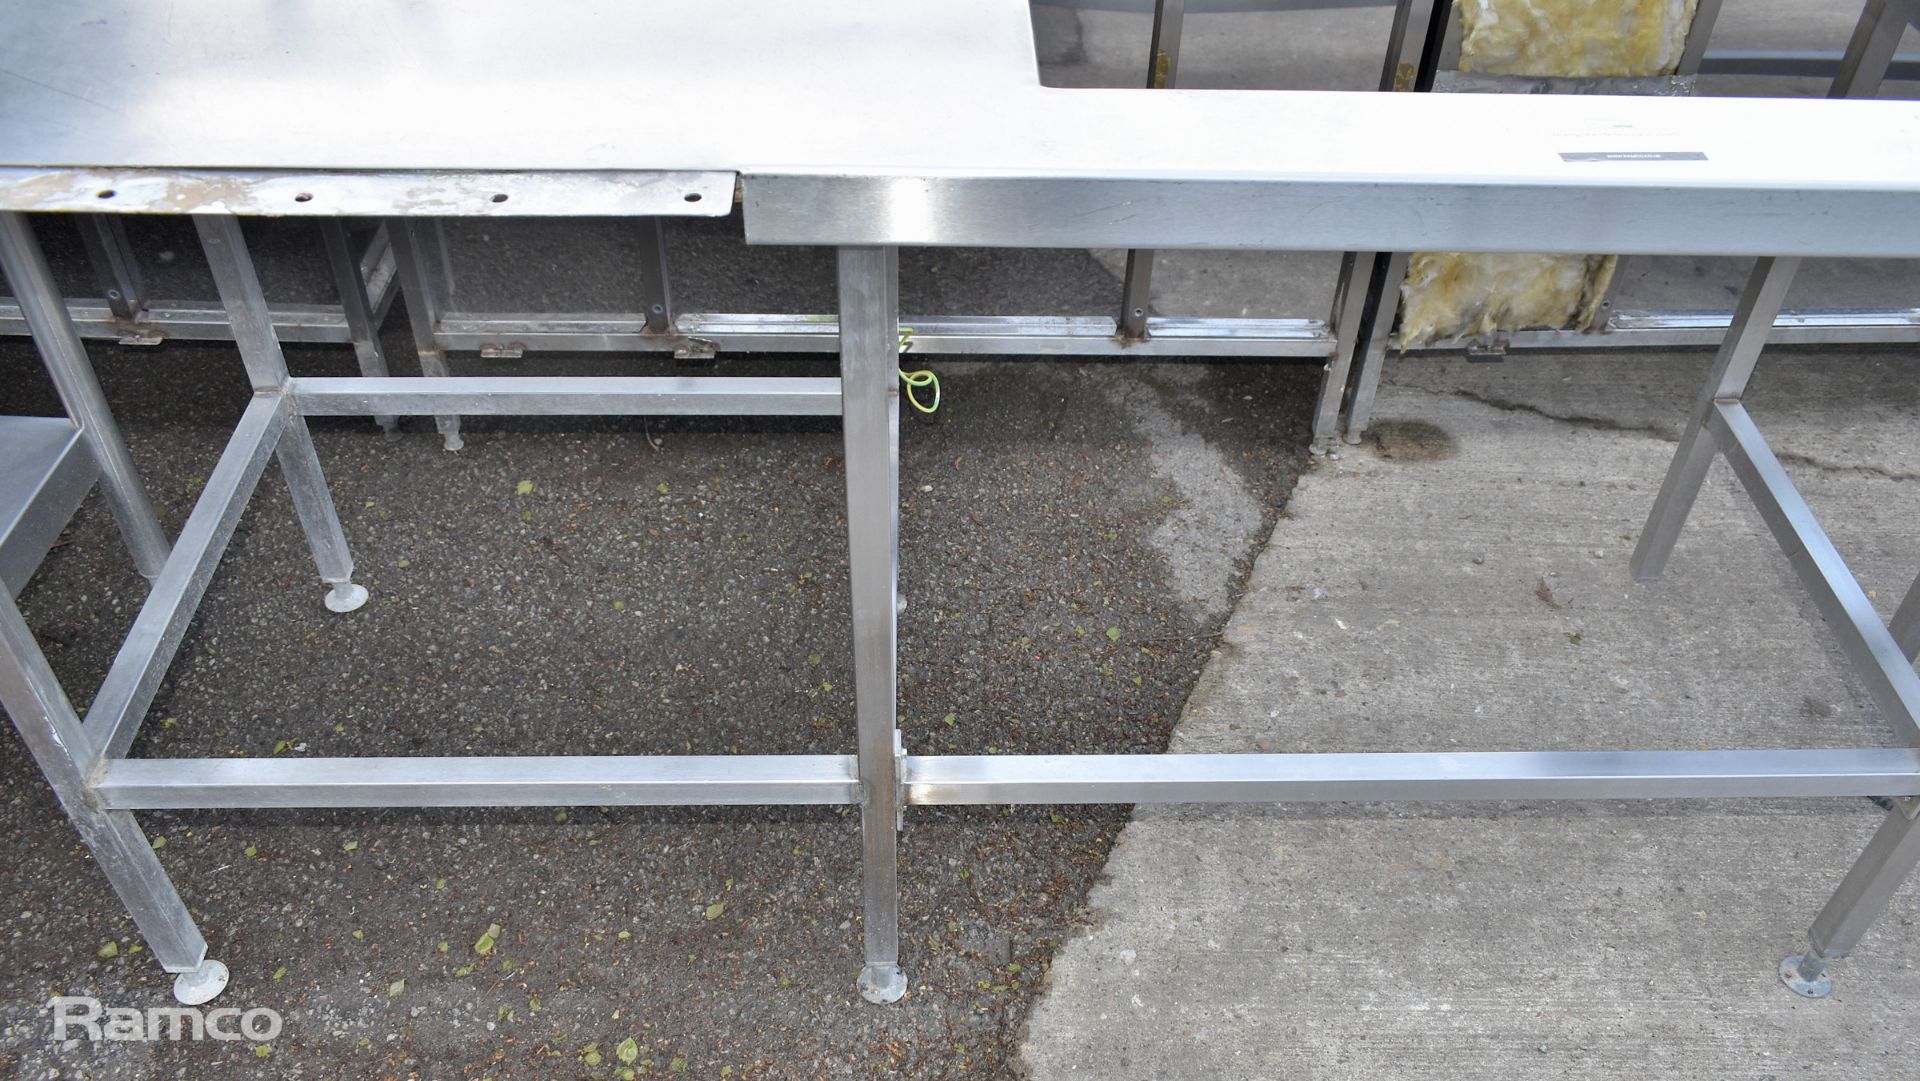 Stainless steel table with upstand and rectangular cut out - L 180 x W 70 x H 93cm - Image 4 of 4